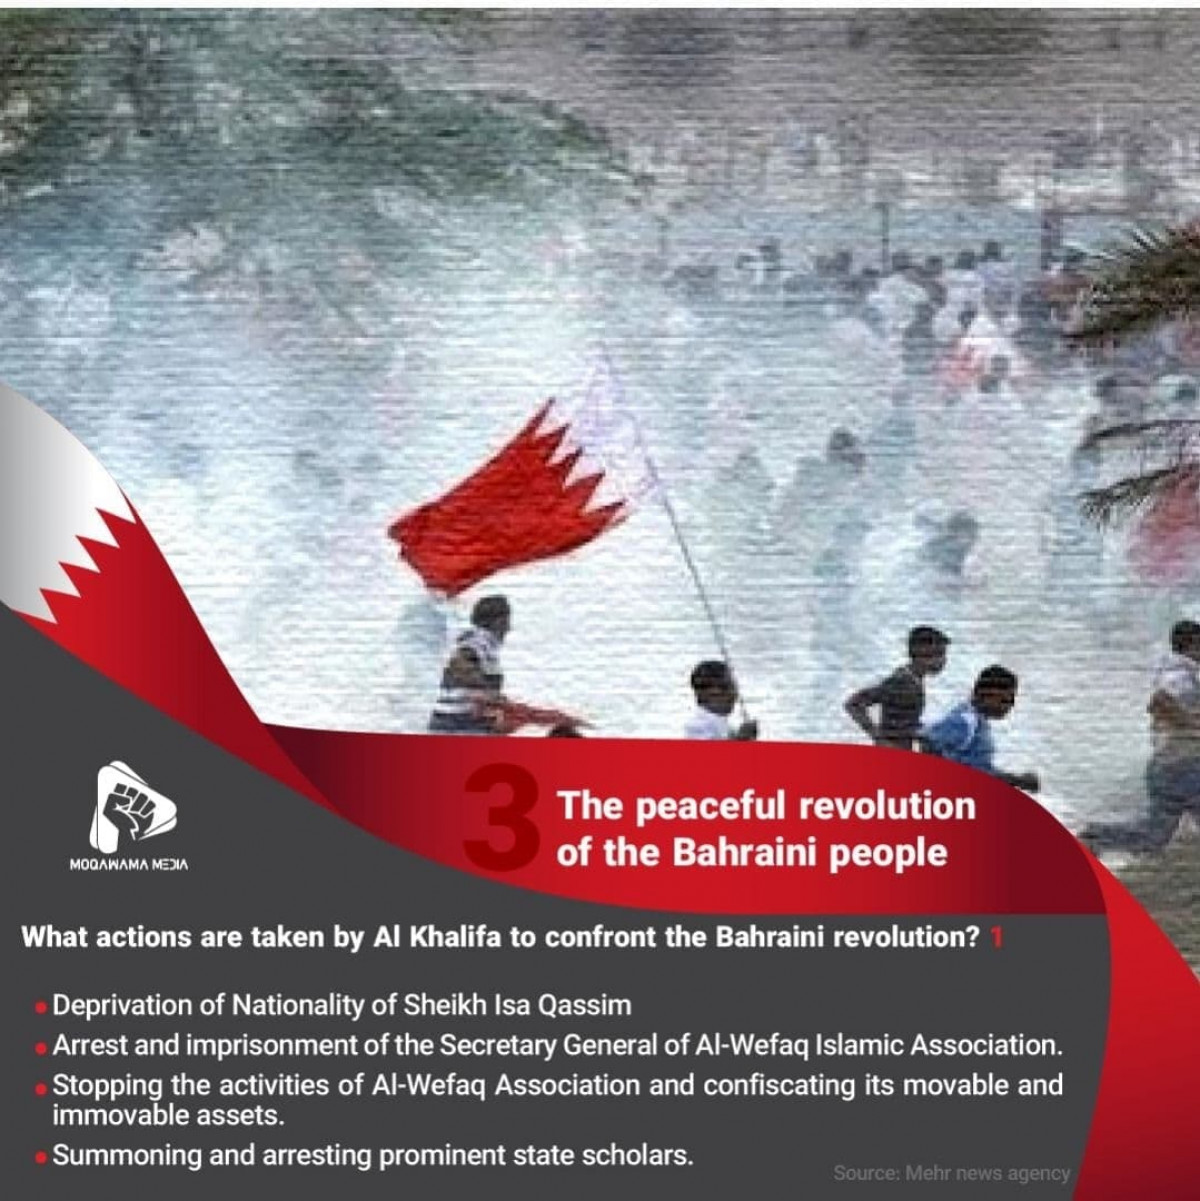 Collection of posters: What actions are taken by Al Khalifa to confront the Bahraini revolution?